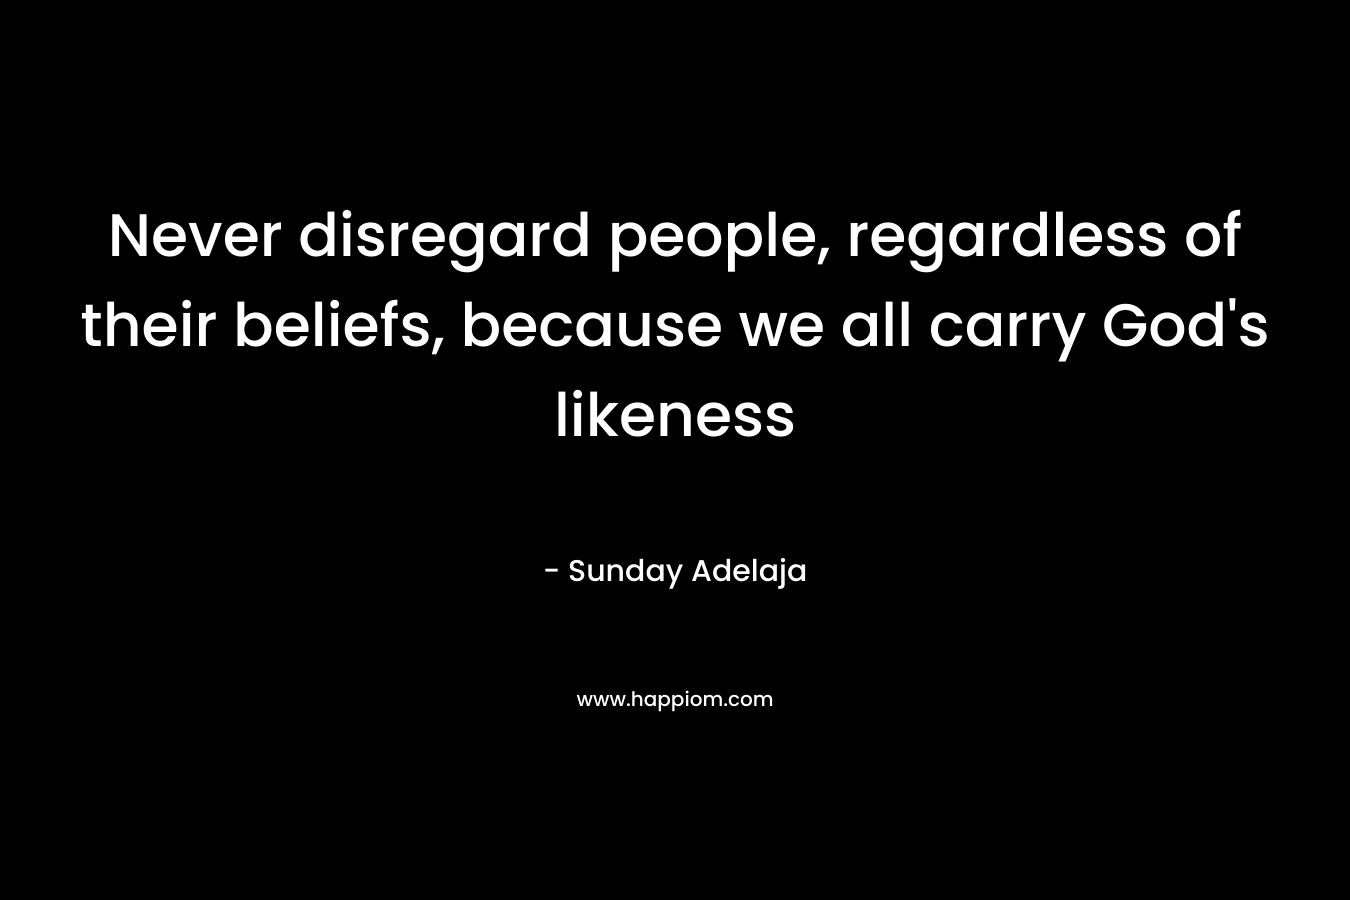 Never disregard people, regardless of their beliefs, because we all carry God's likeness